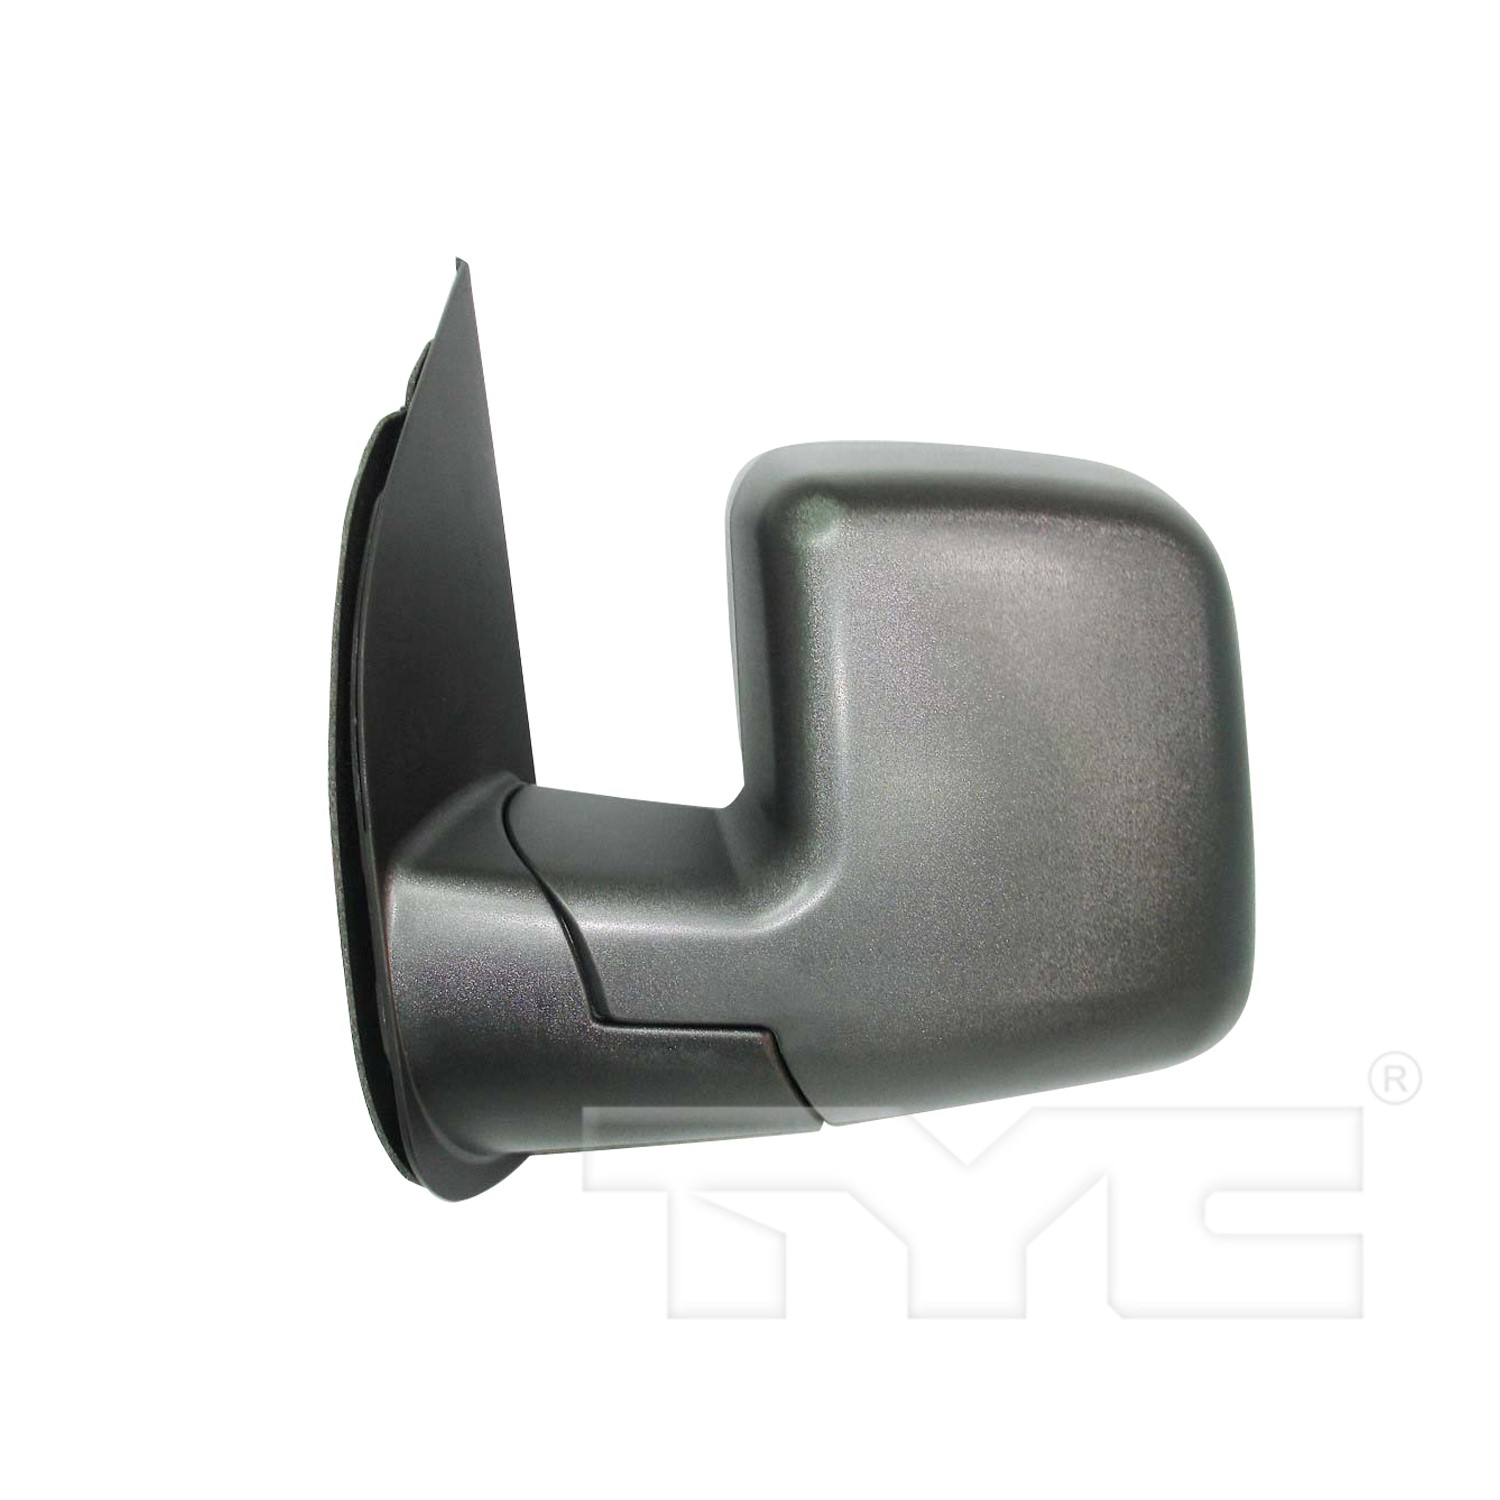 Aftermarket MIRRORS for FORD - E-550 SUPER DUTY, E-550 SUPER DUTY,03-03,LT Mirror outside rear view